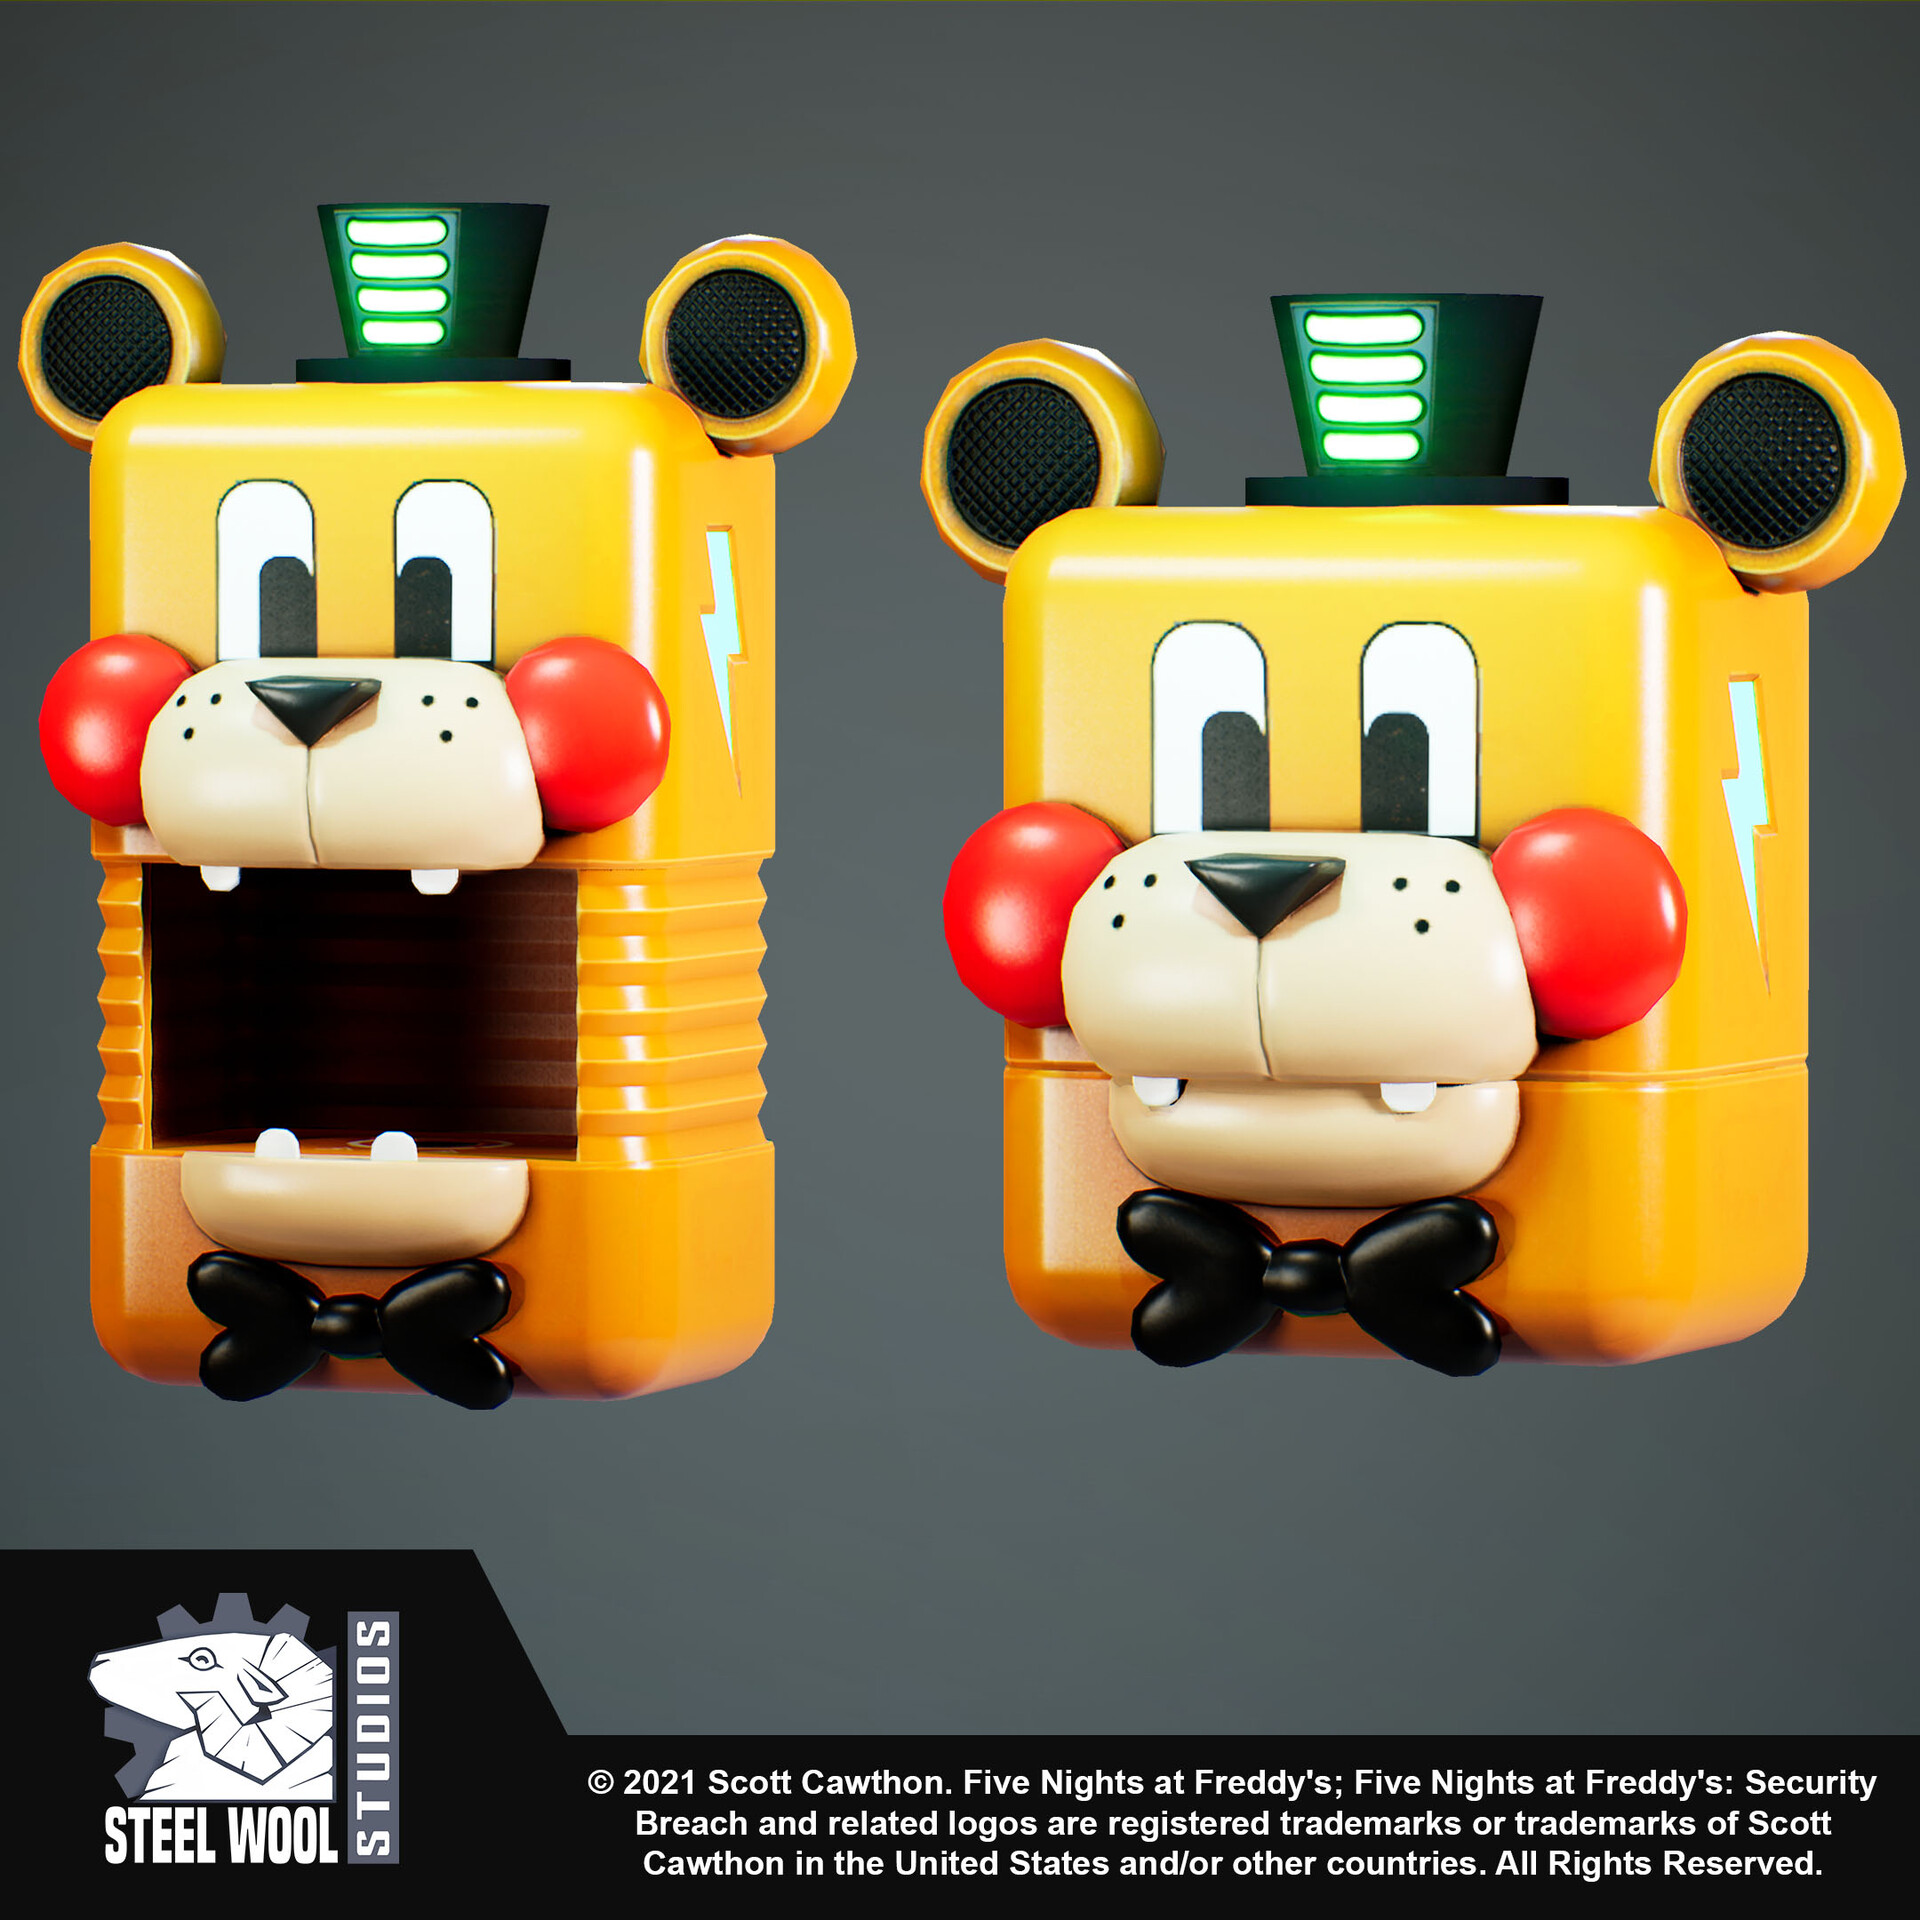 ArtStation - Five Nights at Freddy's Security Breach - Gregory